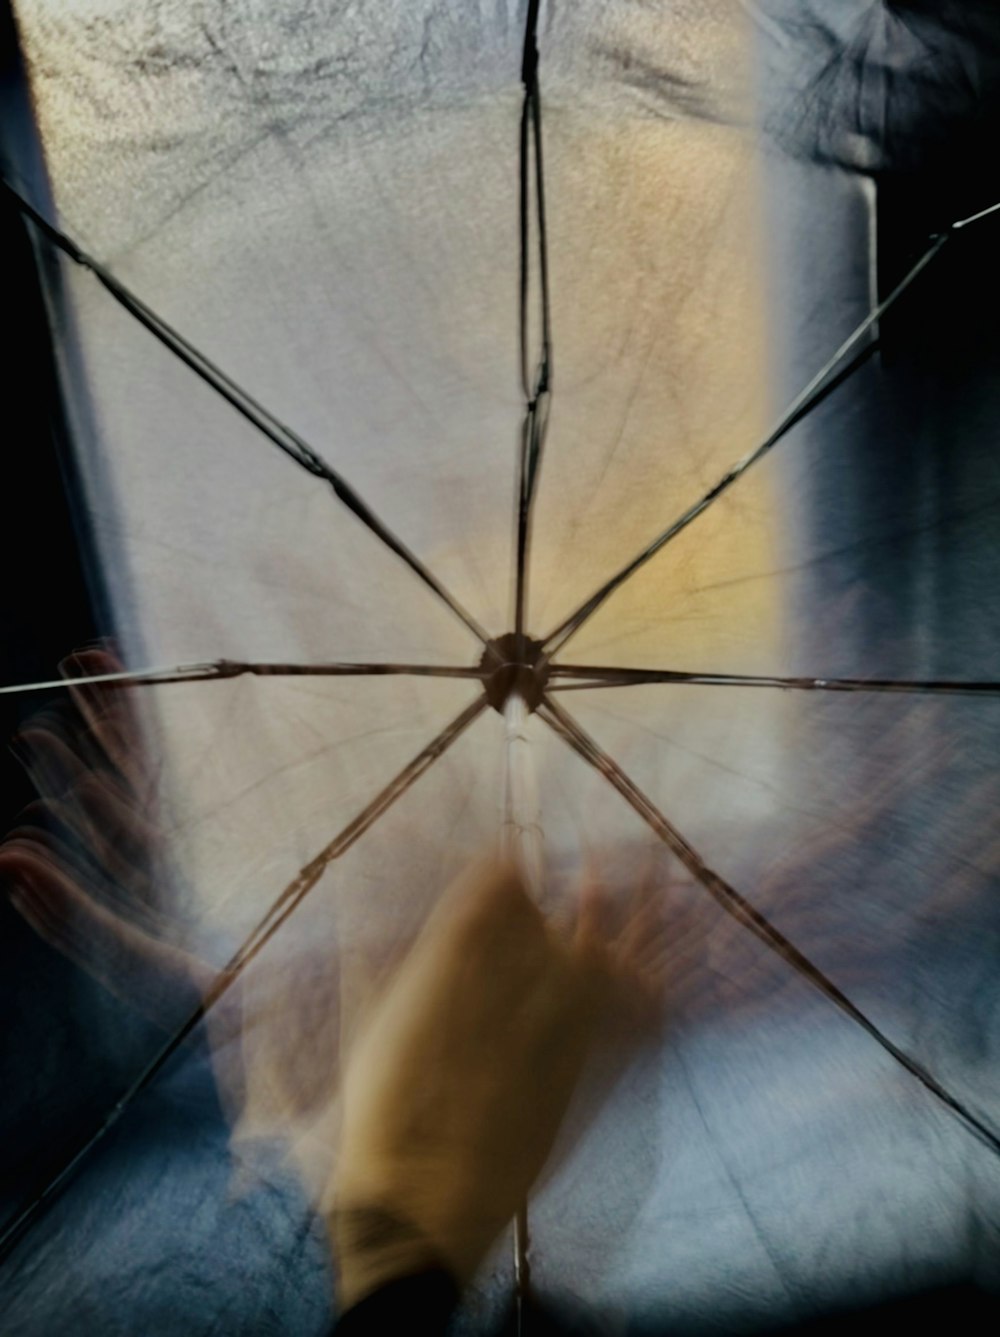 a blurry photo of a person holding an umbrella